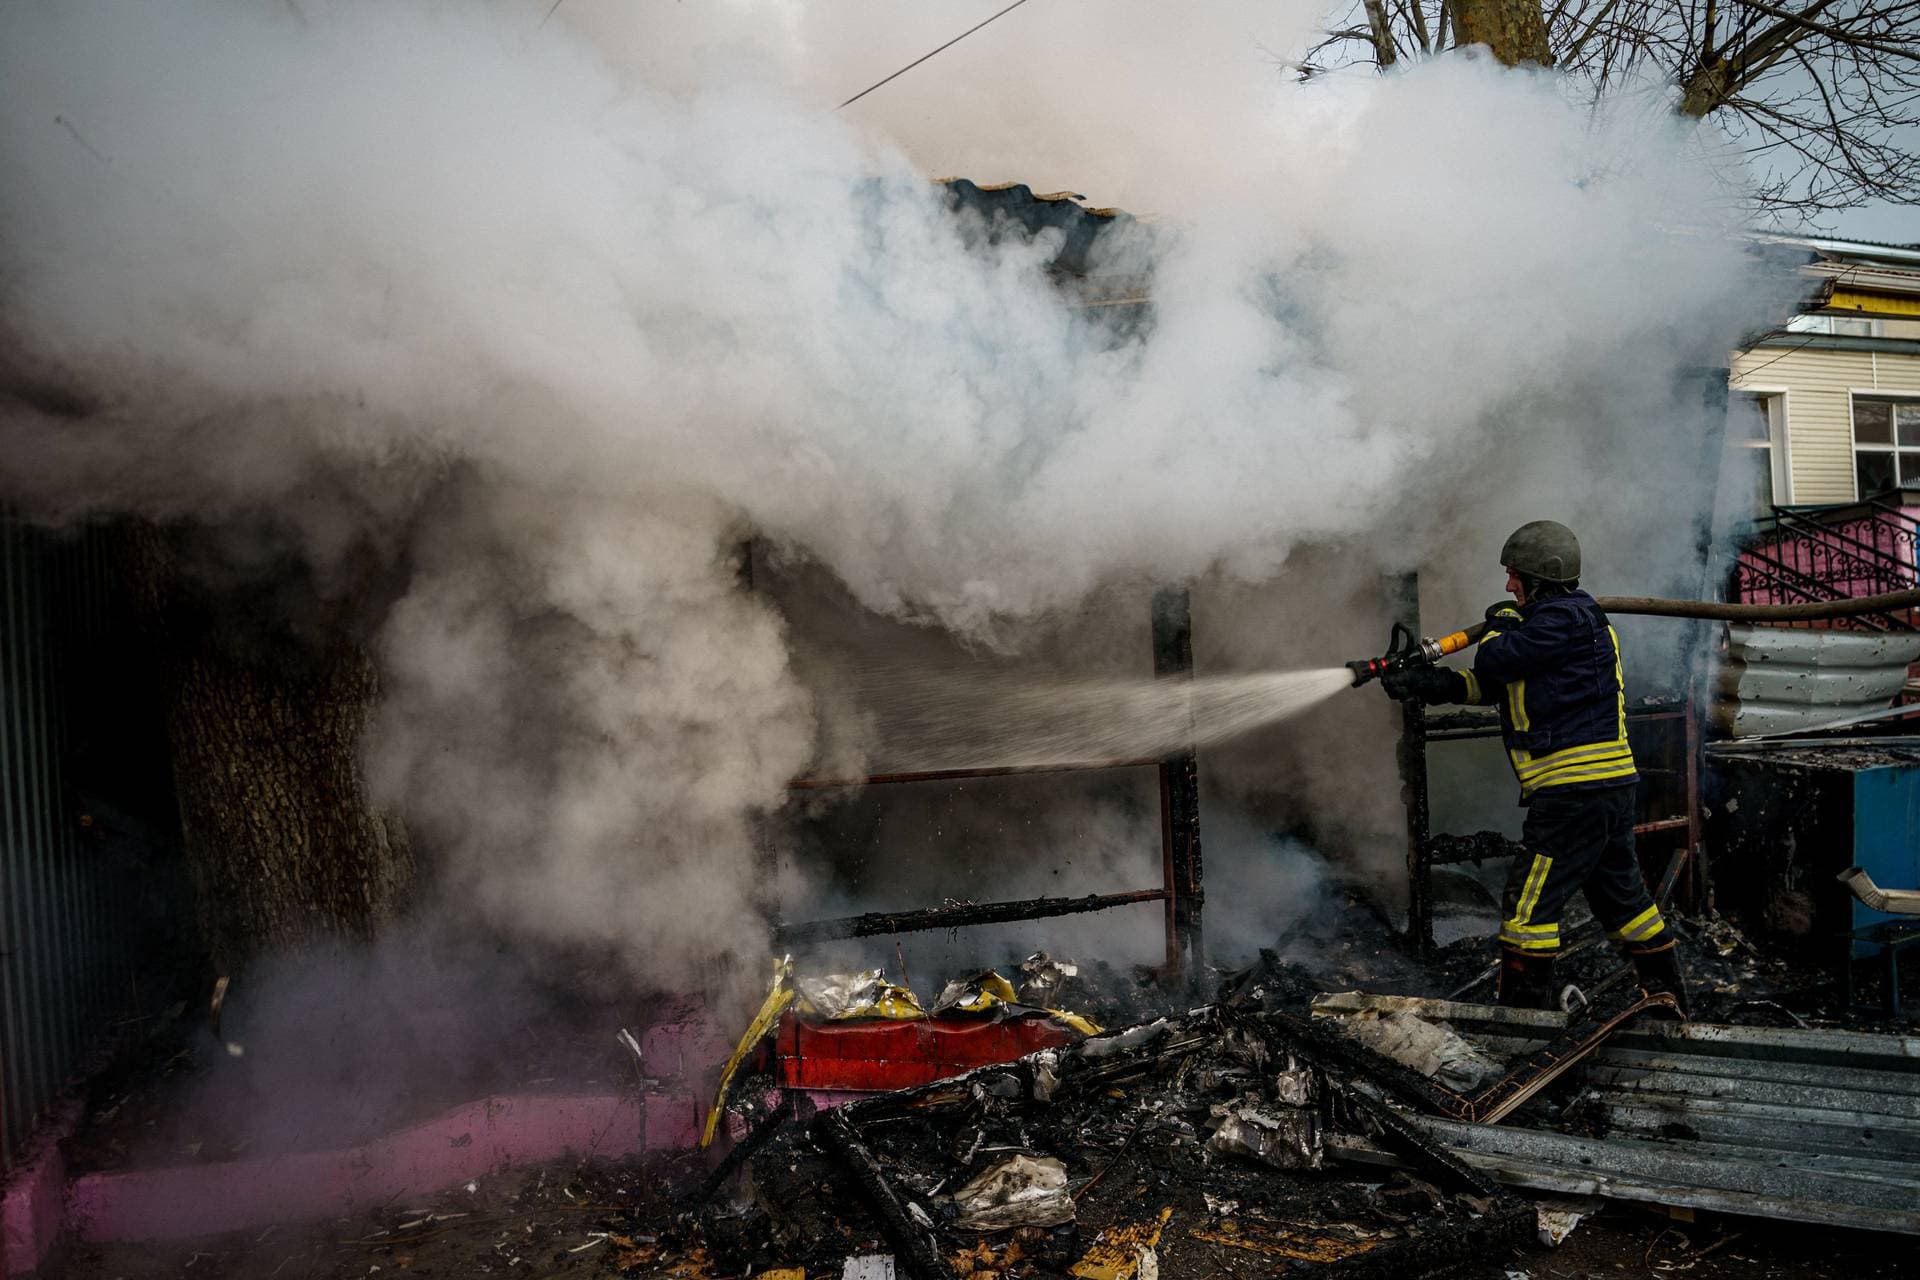 A rescuer extinguishes a fire in a burning shop in Kherson